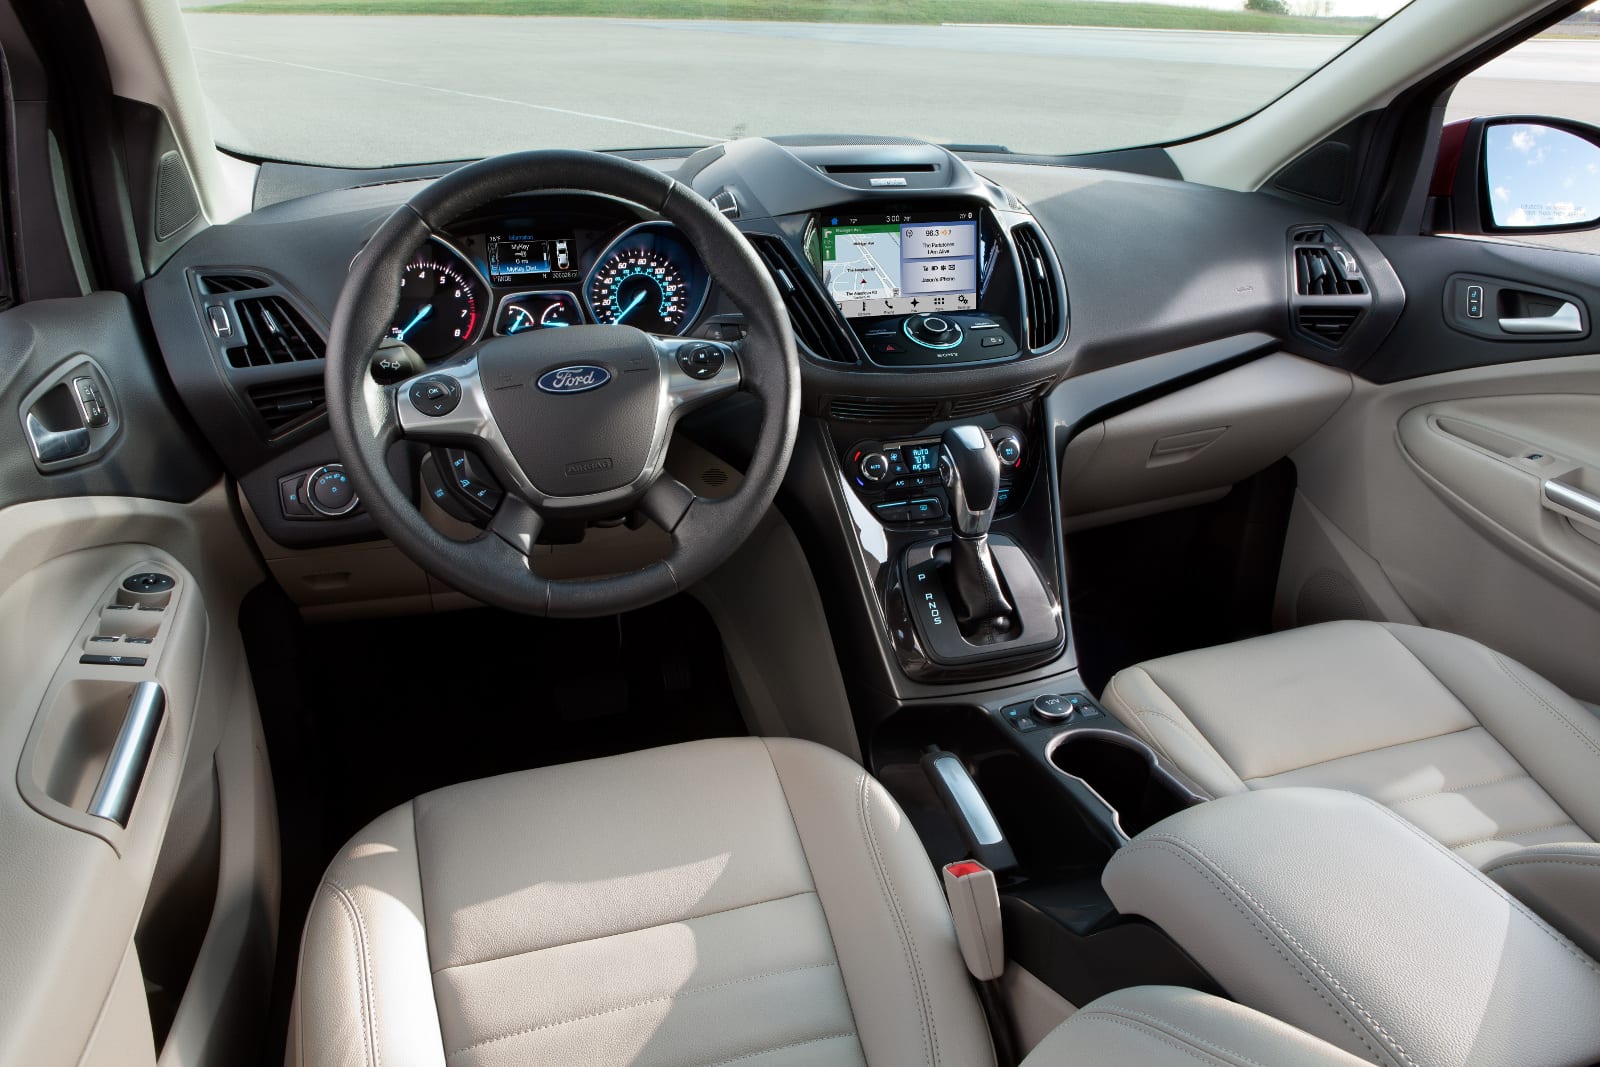 2016 Ford Escape Chrome Package. - Interior